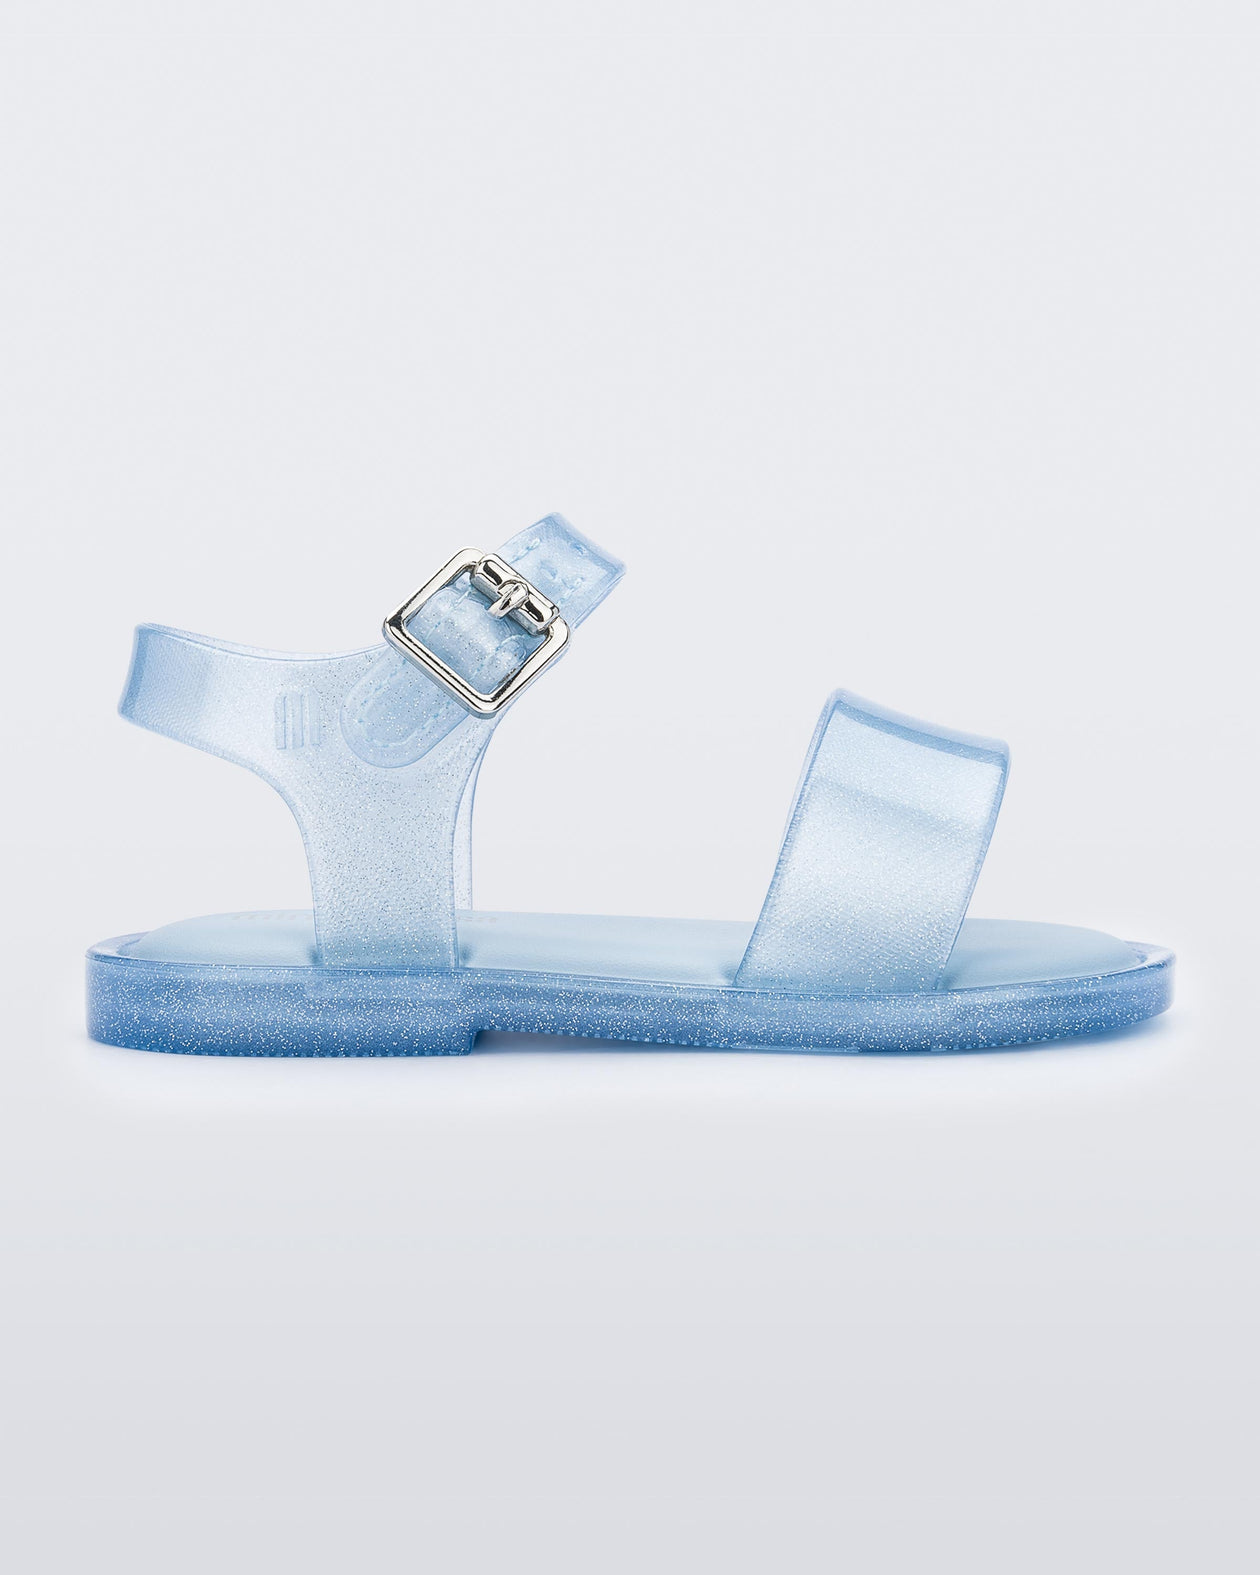 Side view of blue glitter Mini Melissa sandal with two straps and a metal buckle.